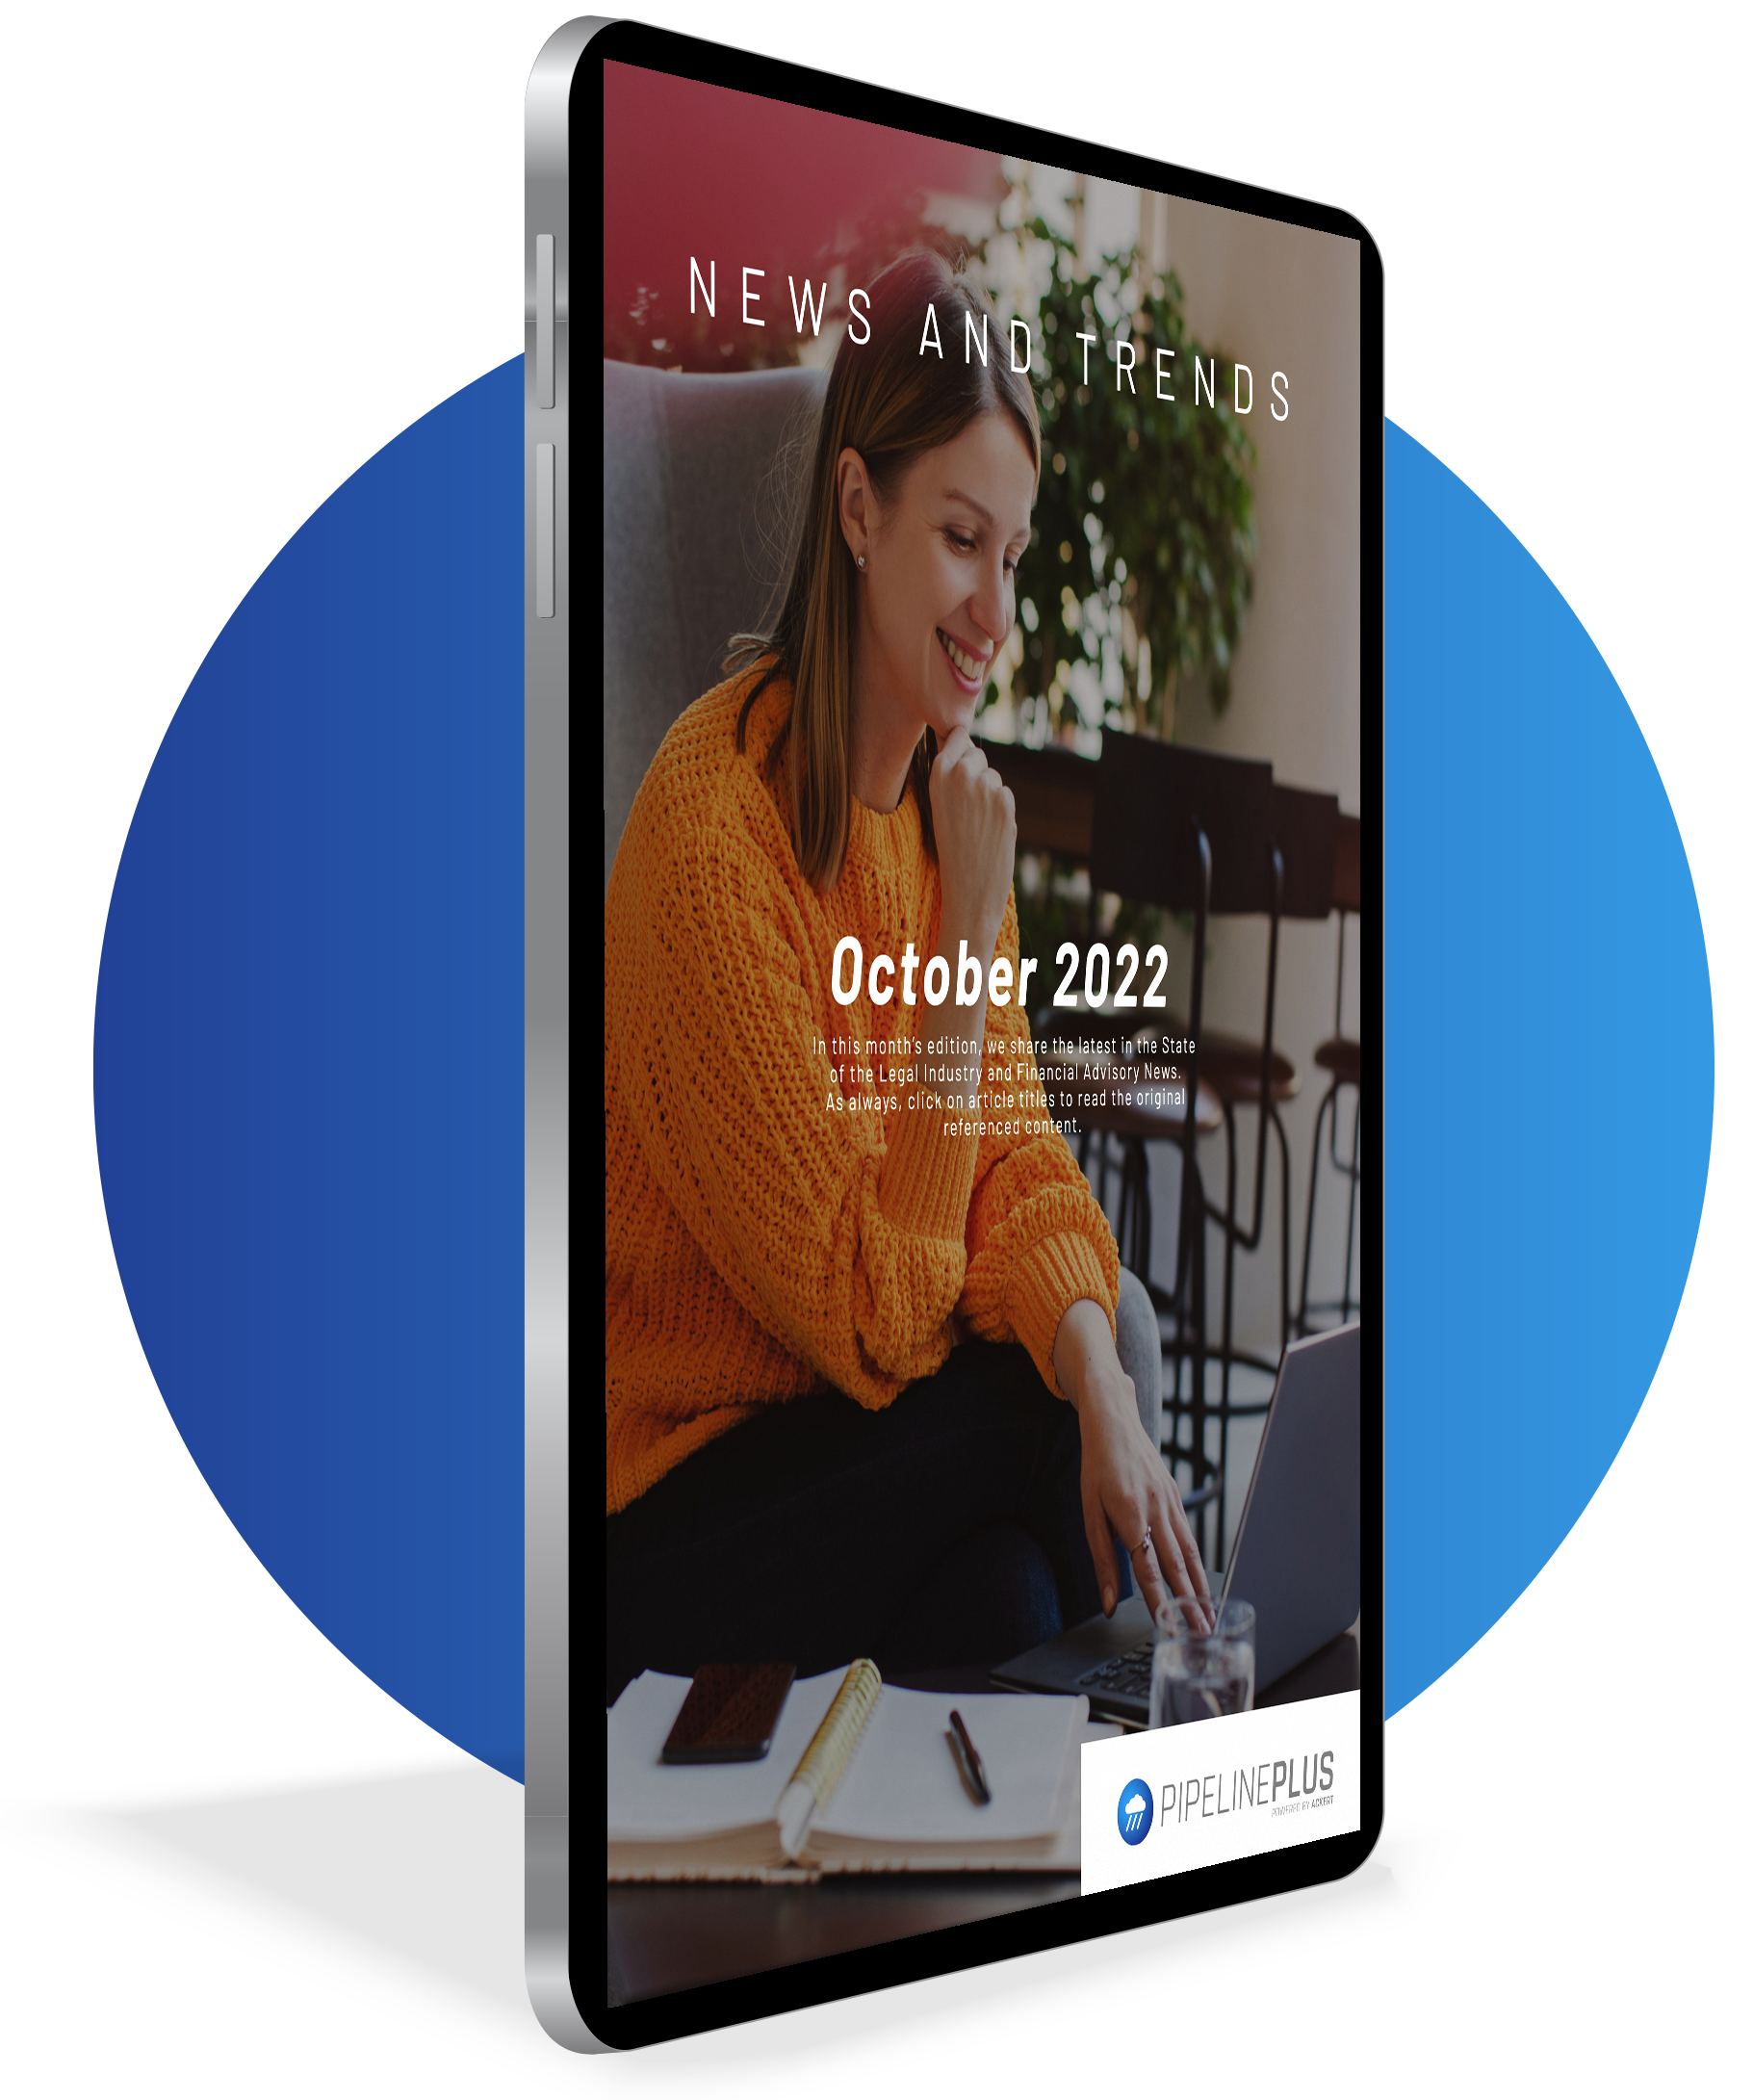 Free Newsletter Download | October 2022 News and Trends